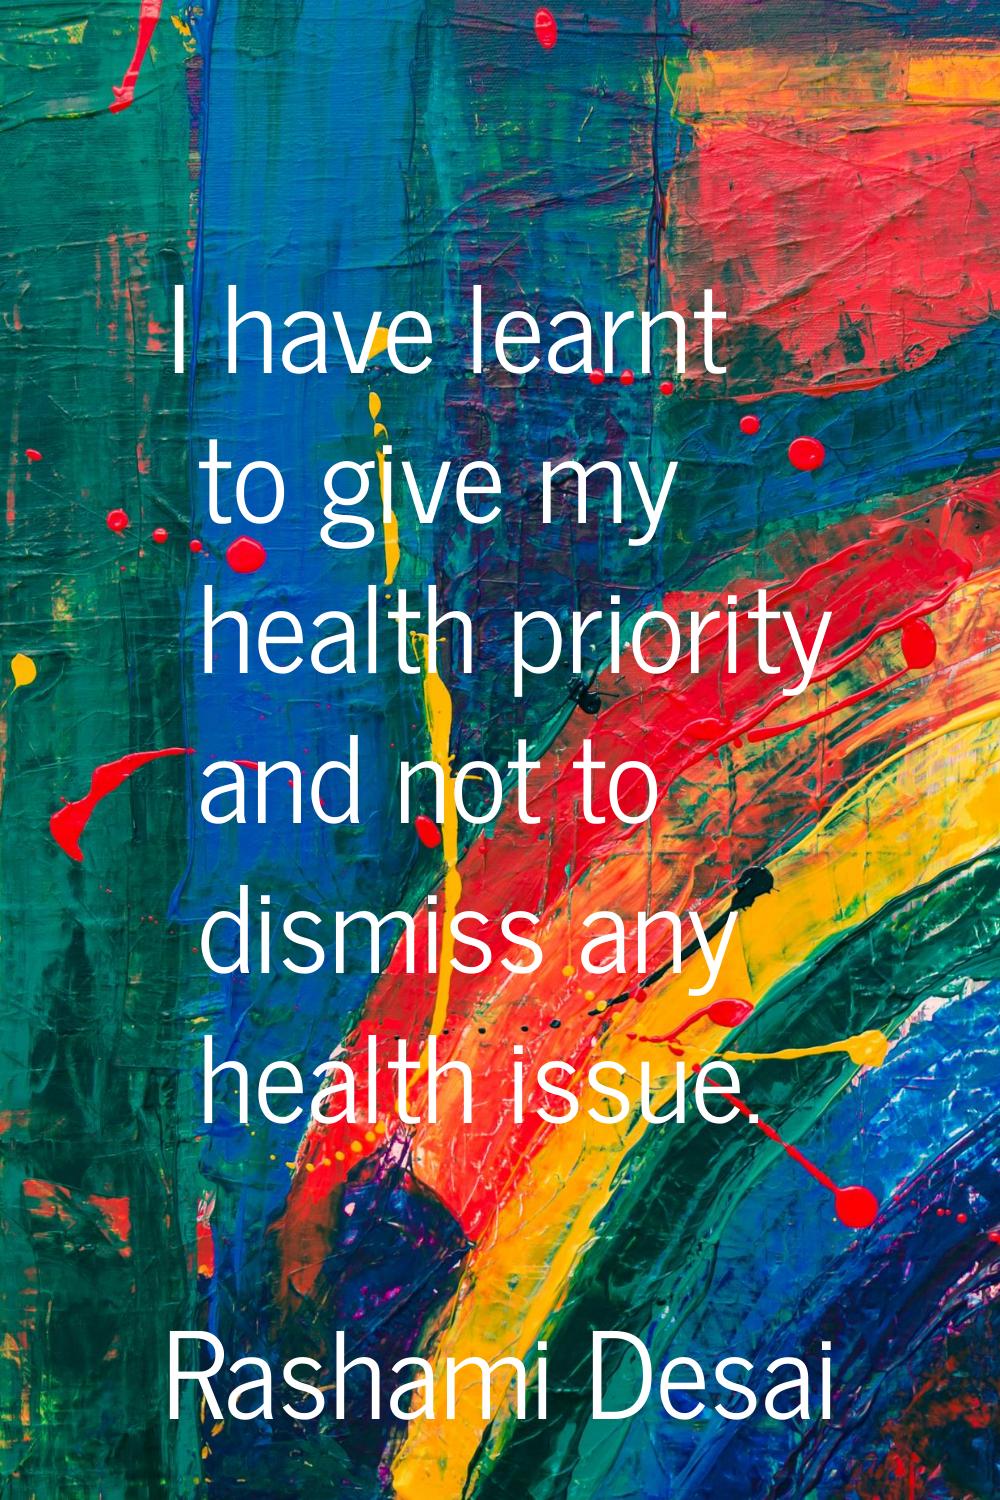 I have learnt to give my health priority and not to dismiss any health issue.